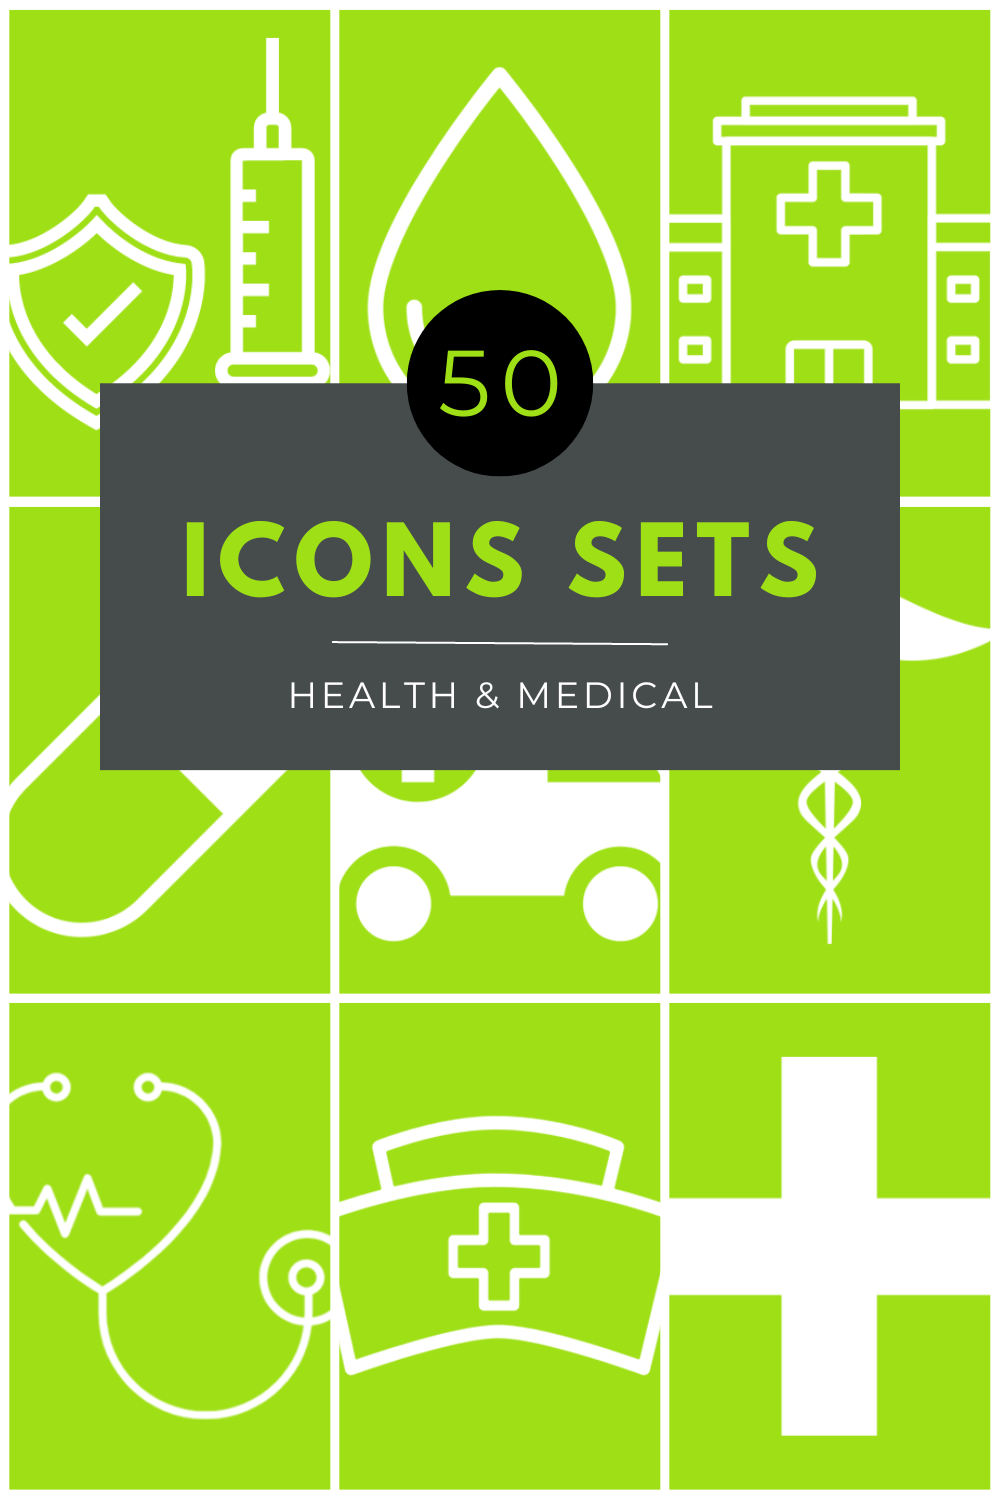 High-Quality Healthcare Icons pinterest image.